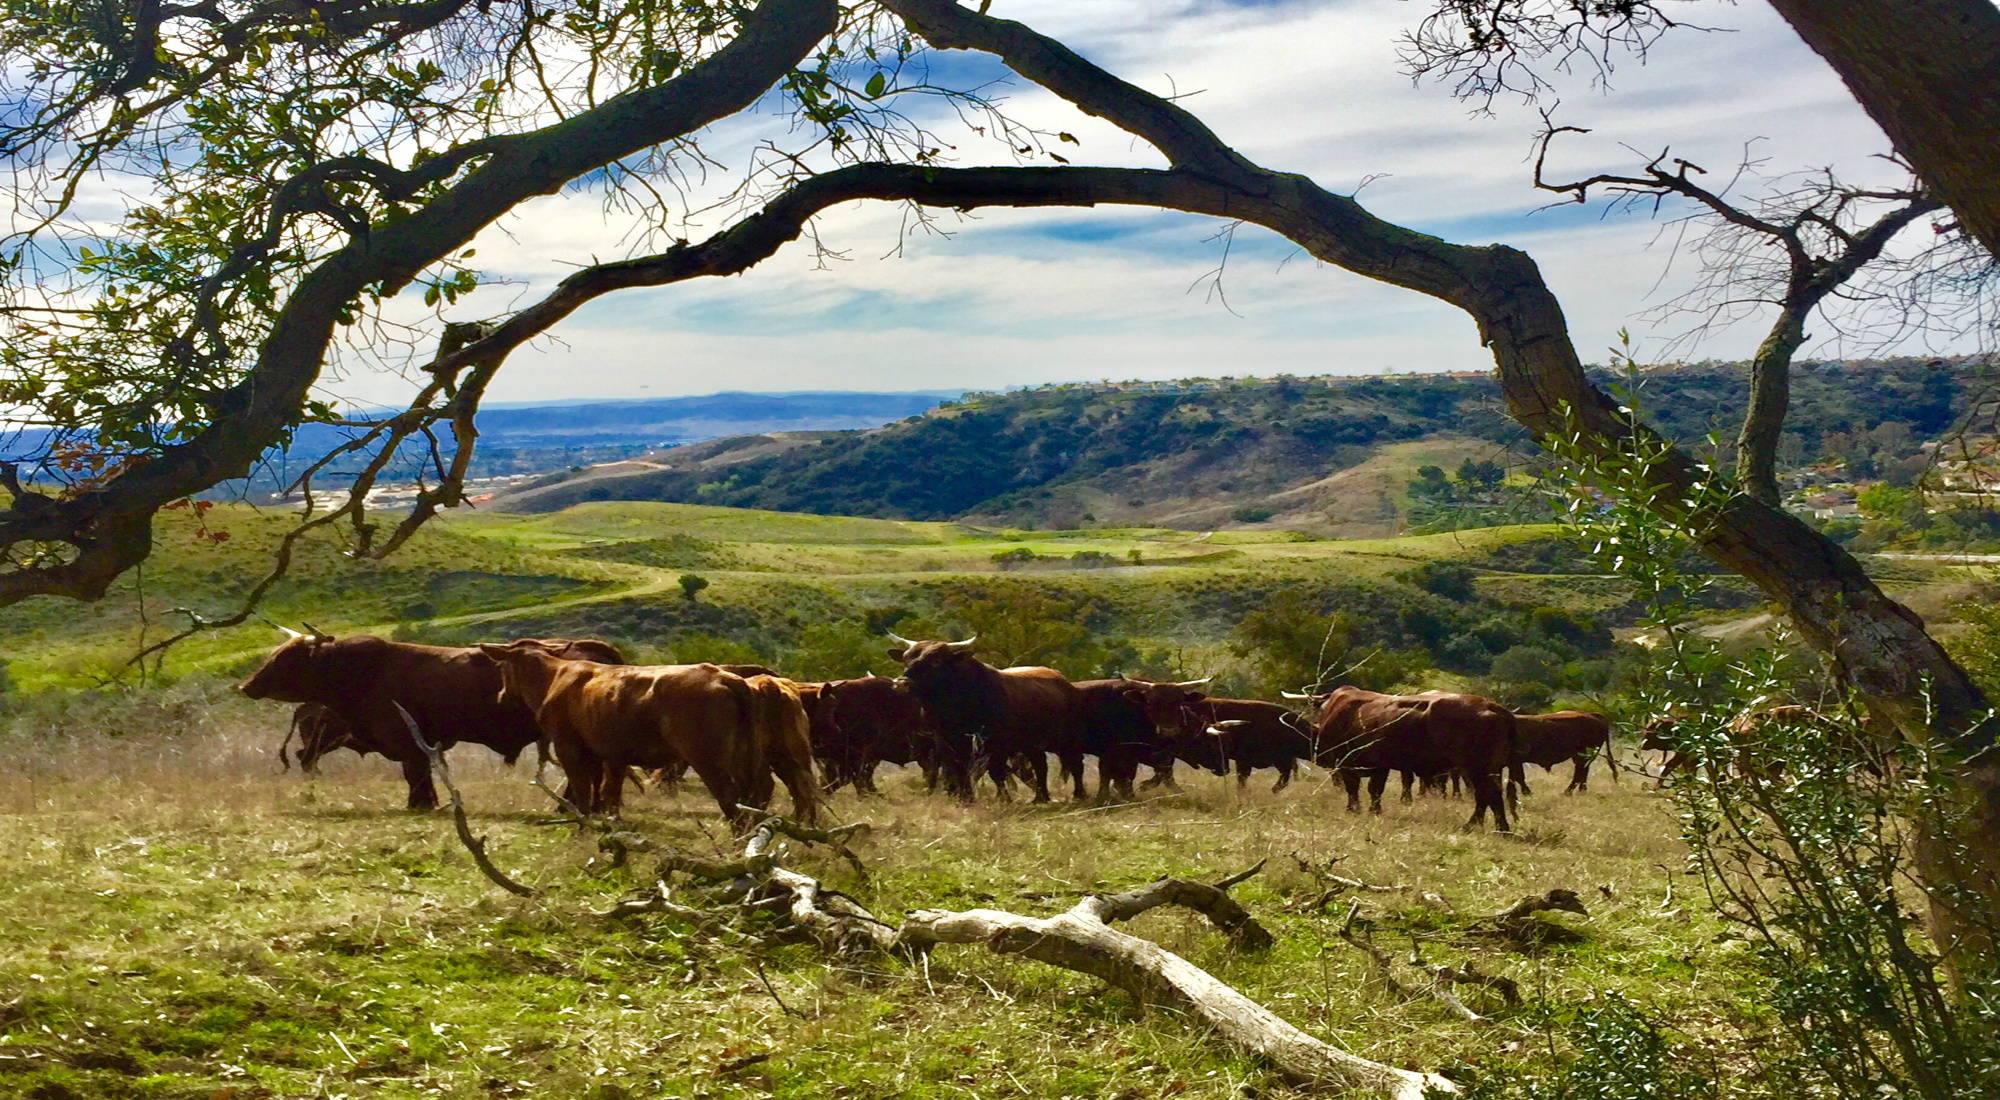 brown cattle walking behind a tree with branches, green grass and blue sky